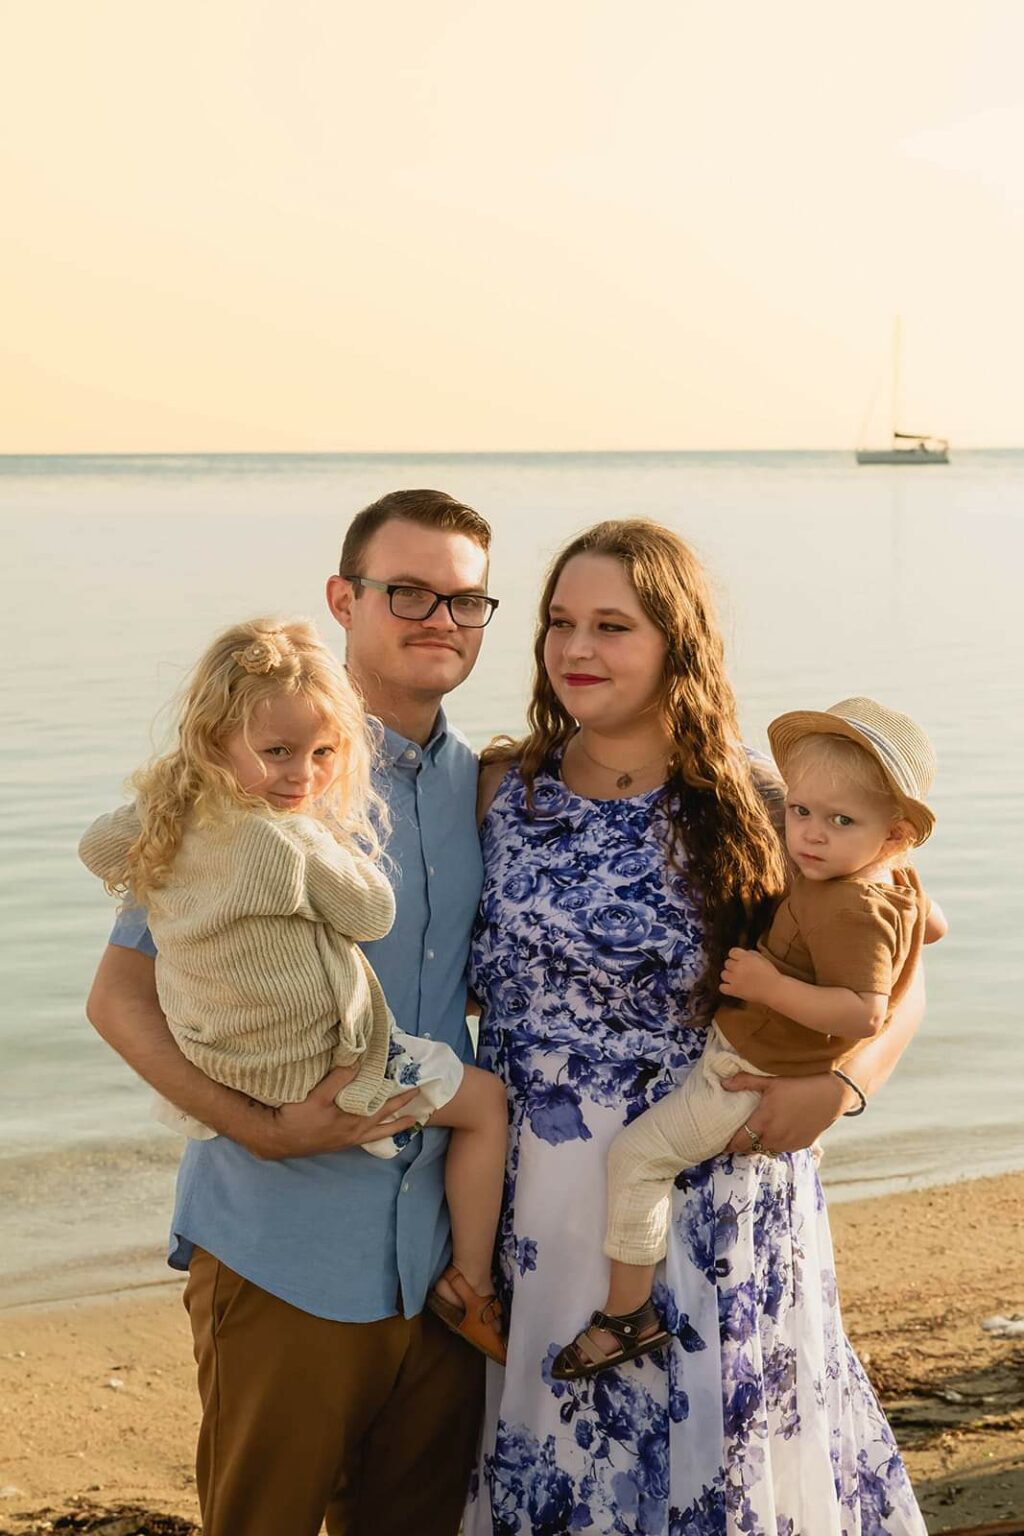 A family of four on a serene beach. The mother is wearing a long white dress with cobalt blue flowers and has long hair. She is holding their sweet son and is embracing her husband who has a blue shirt and khaki pants and is holding their daughter.